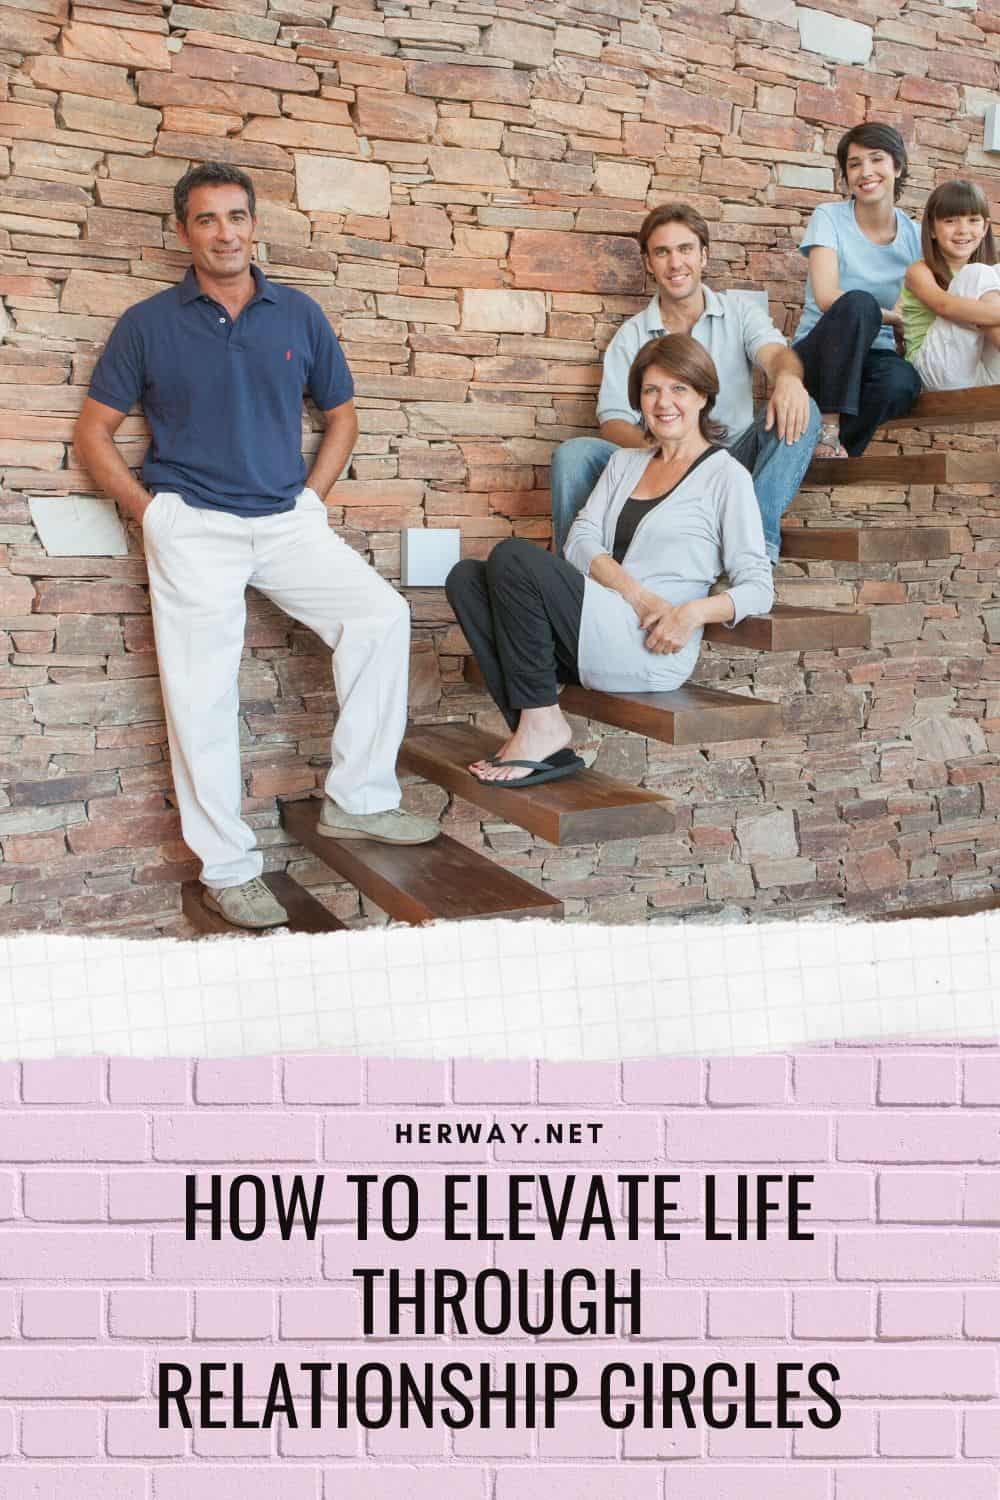 How To Elevate Life Through Relationship Circles